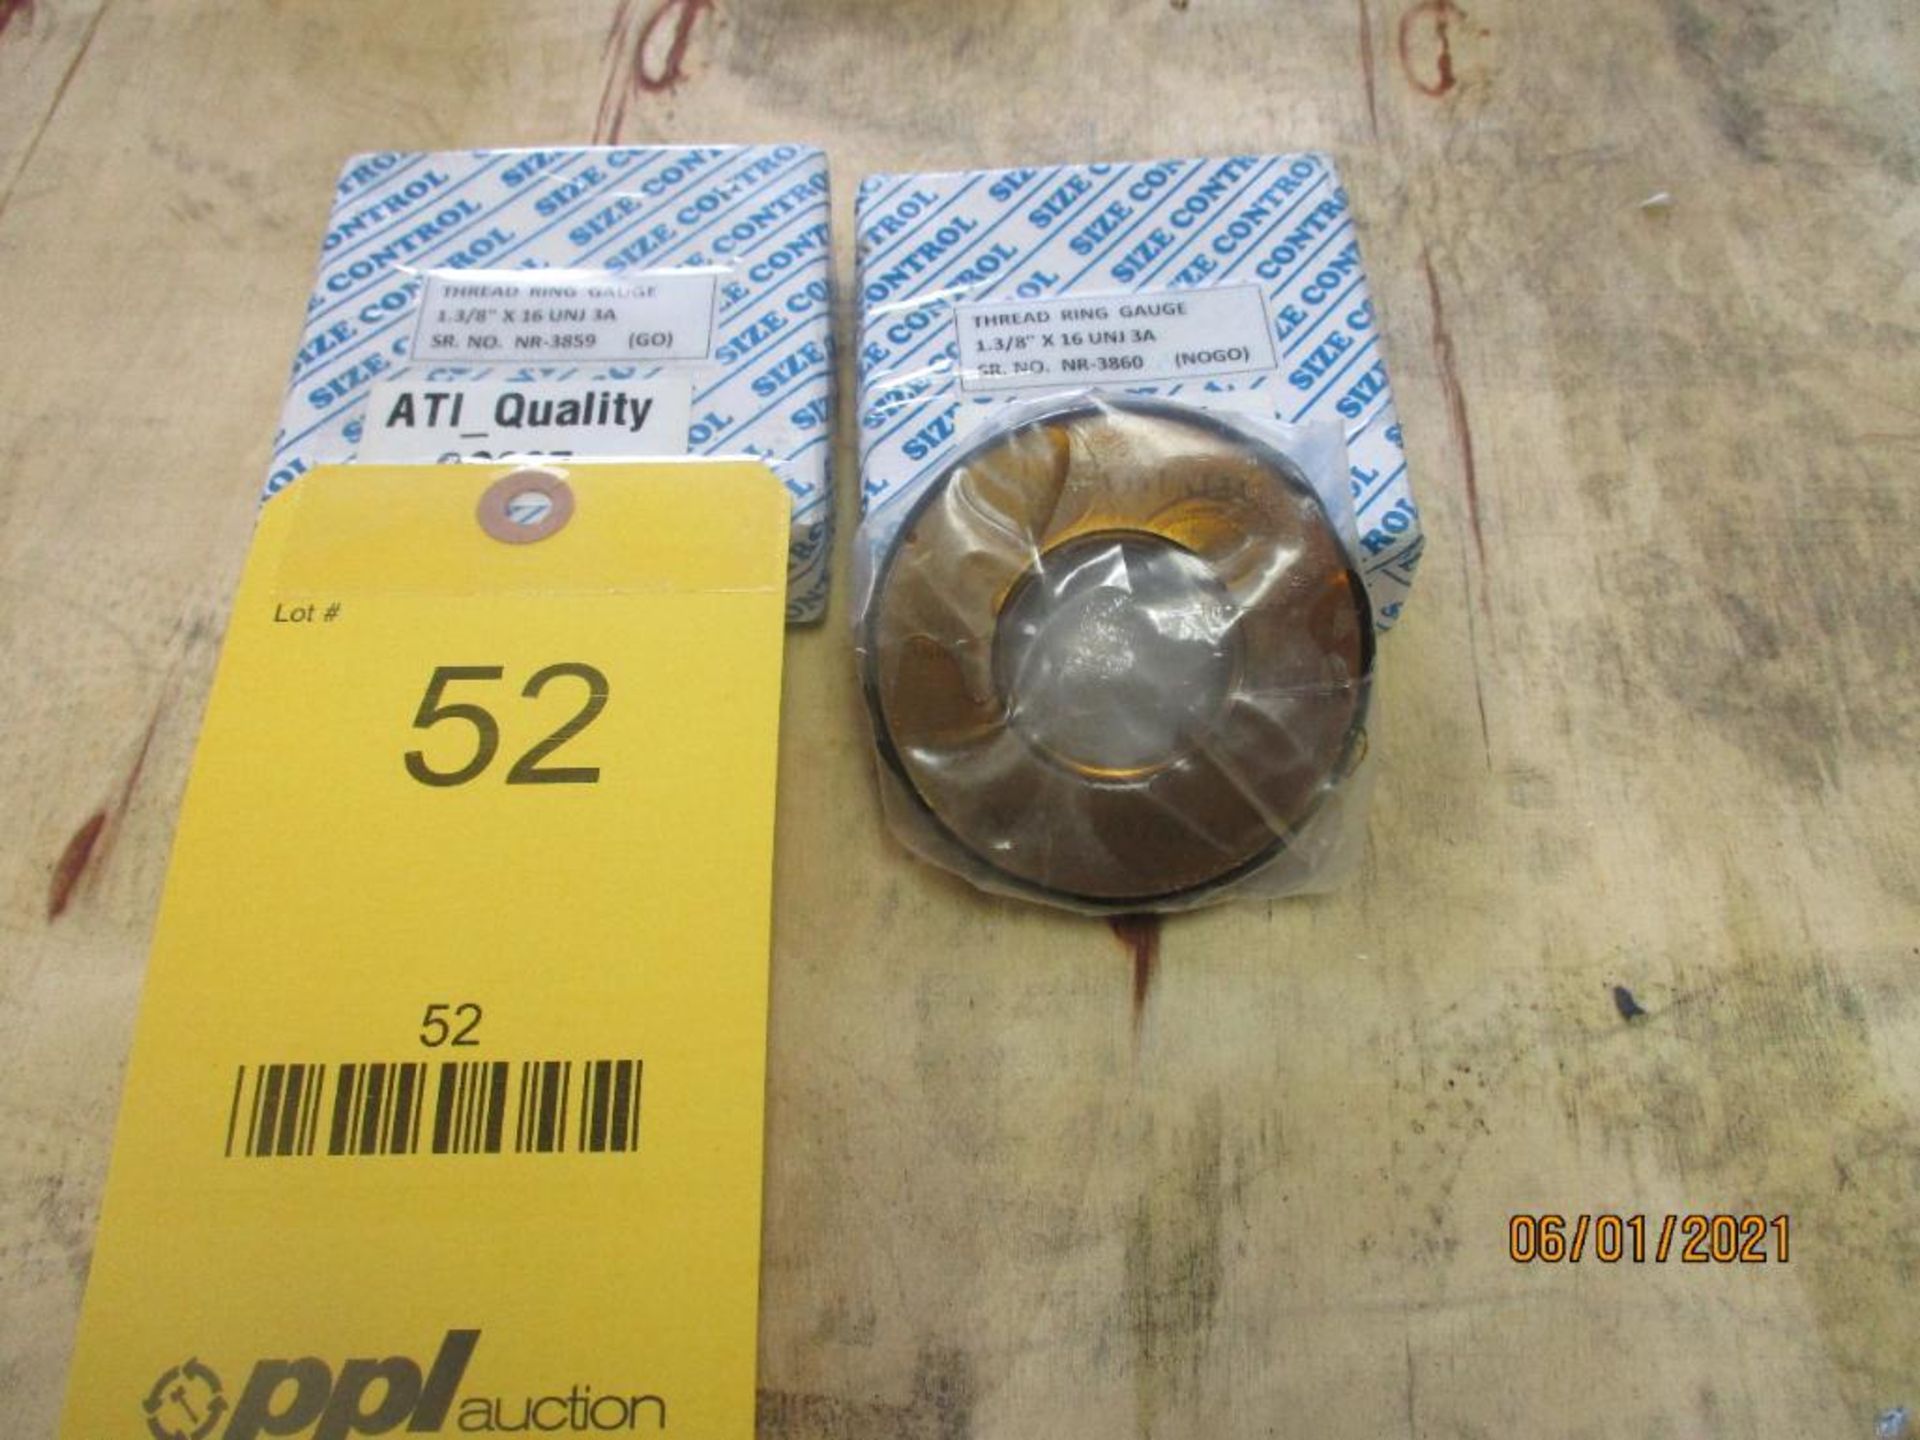 Set of GO/NOGO Thread Ring Gages, 1-3/8 in. - 16 UNJ-3A (All inspection eq. is like New and Mostly